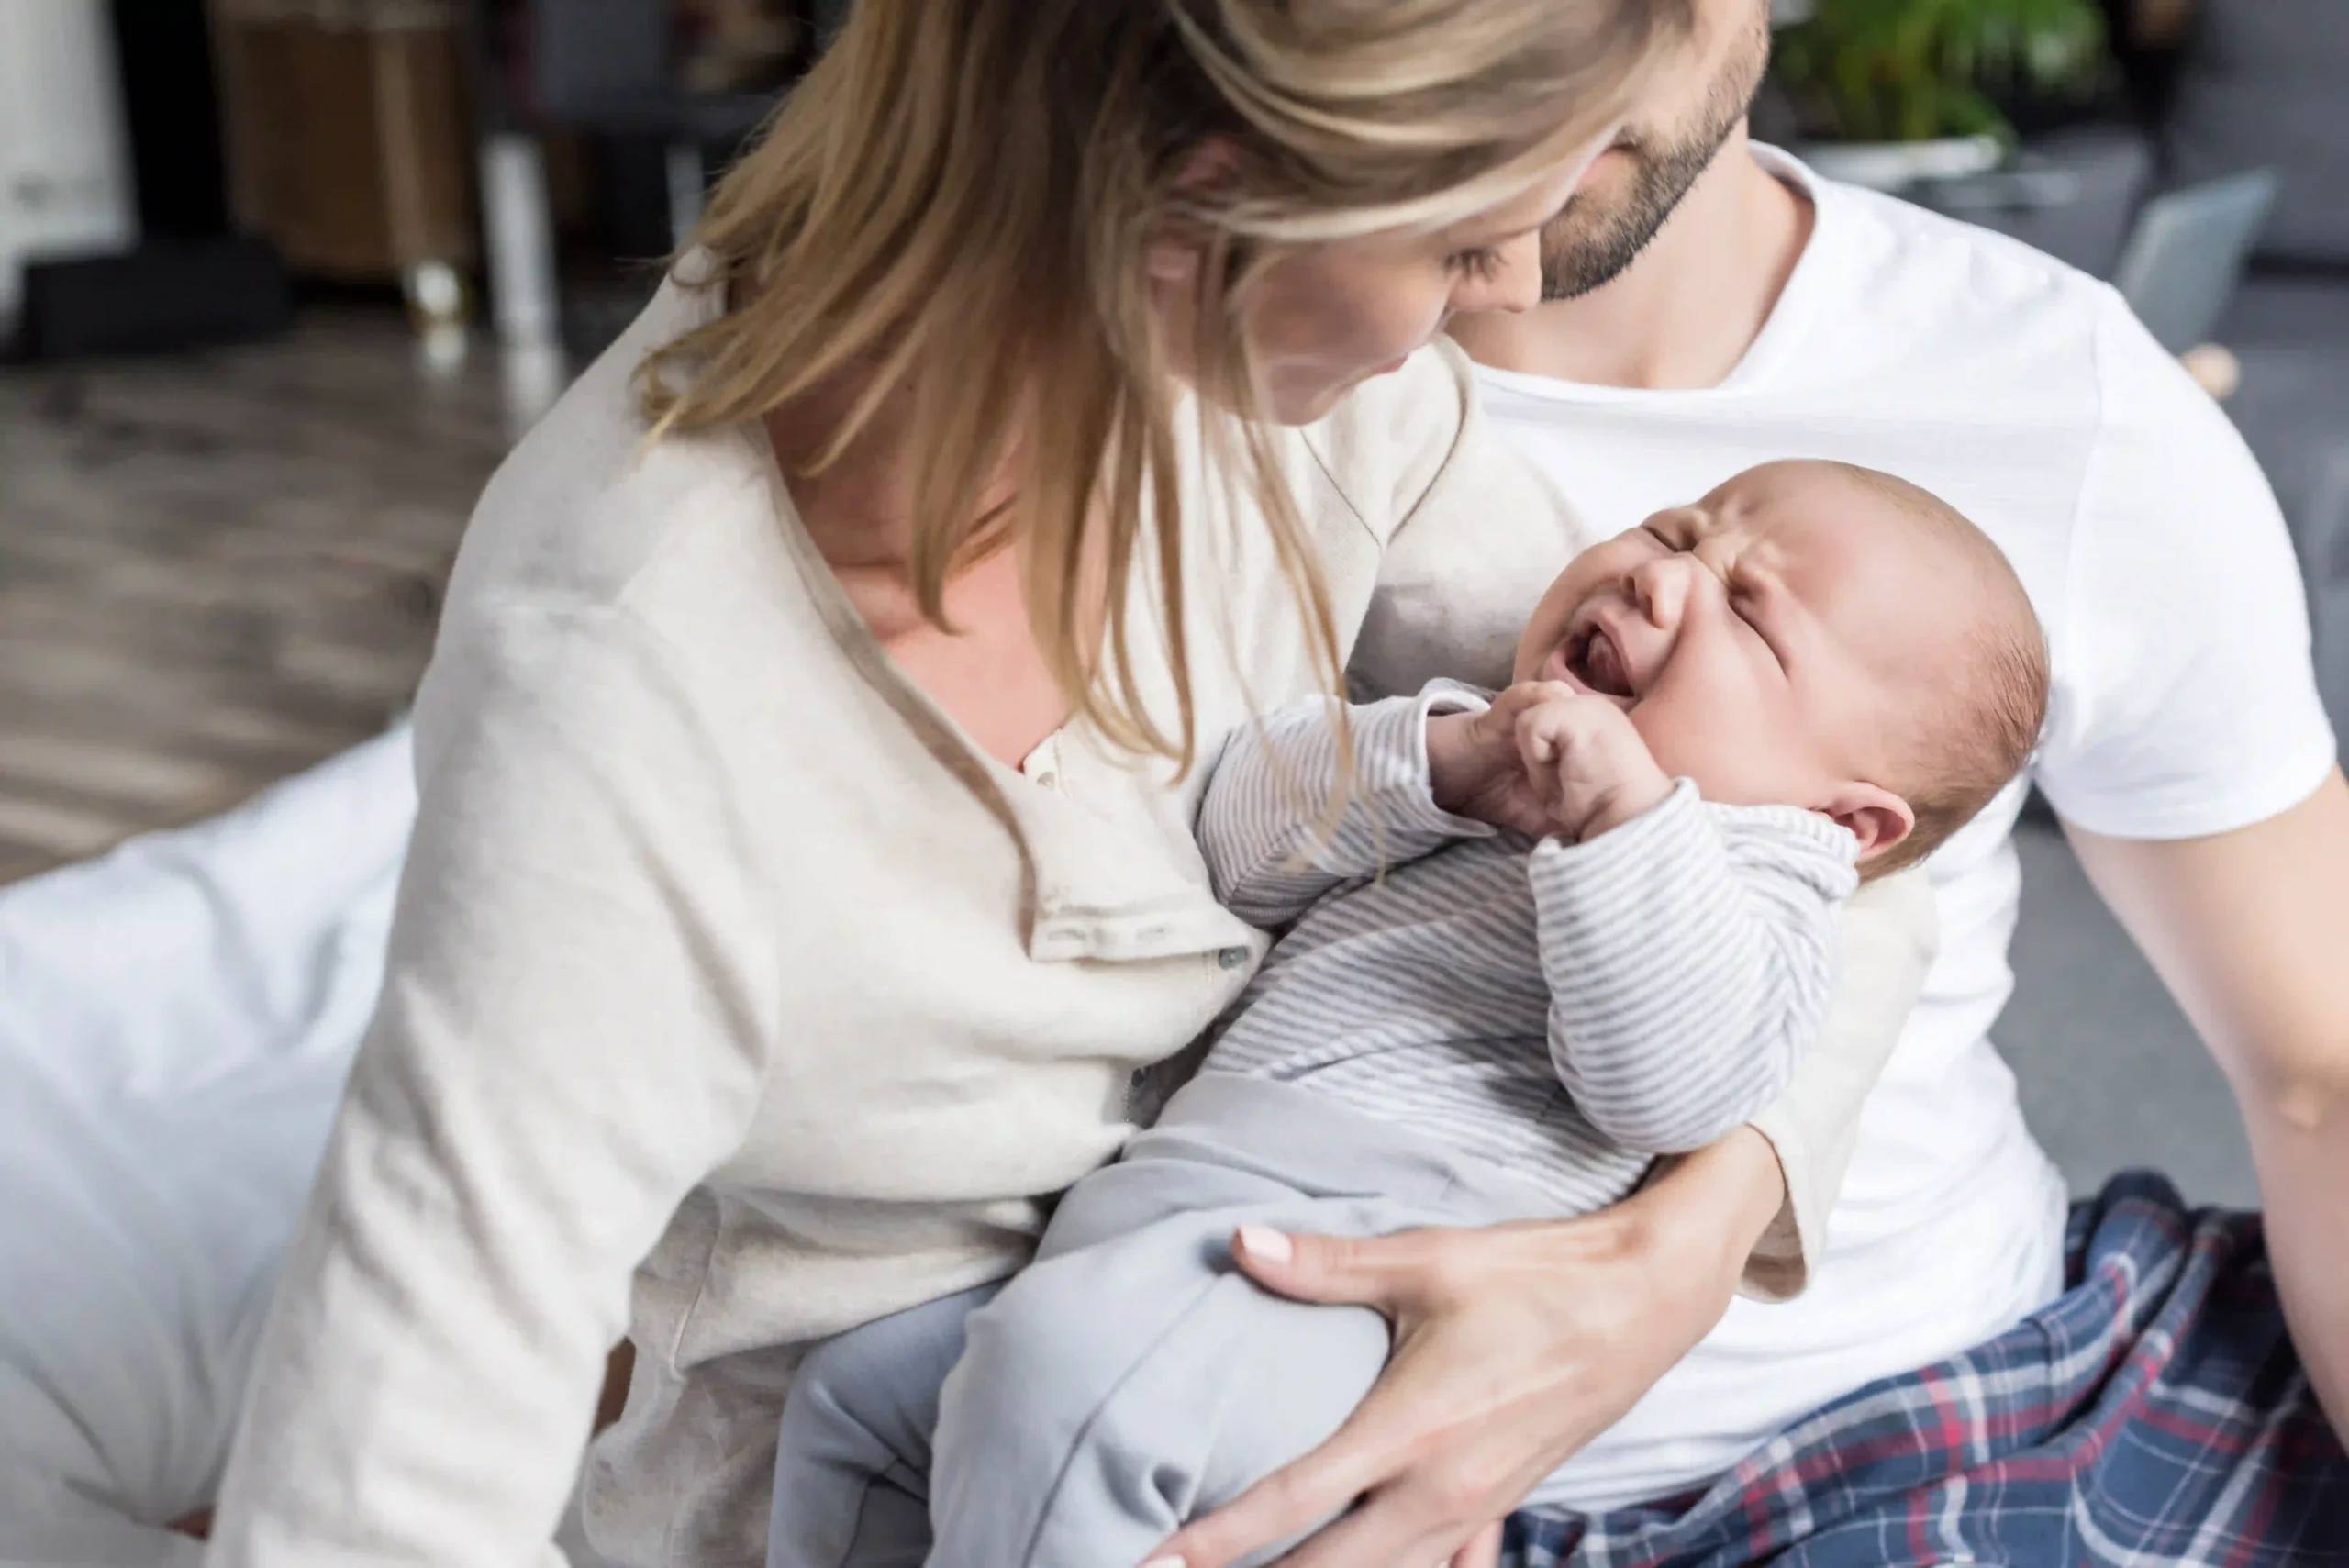 Managing Colic and Crying: Proven Tips for Soothing Your Unsettled Newborn